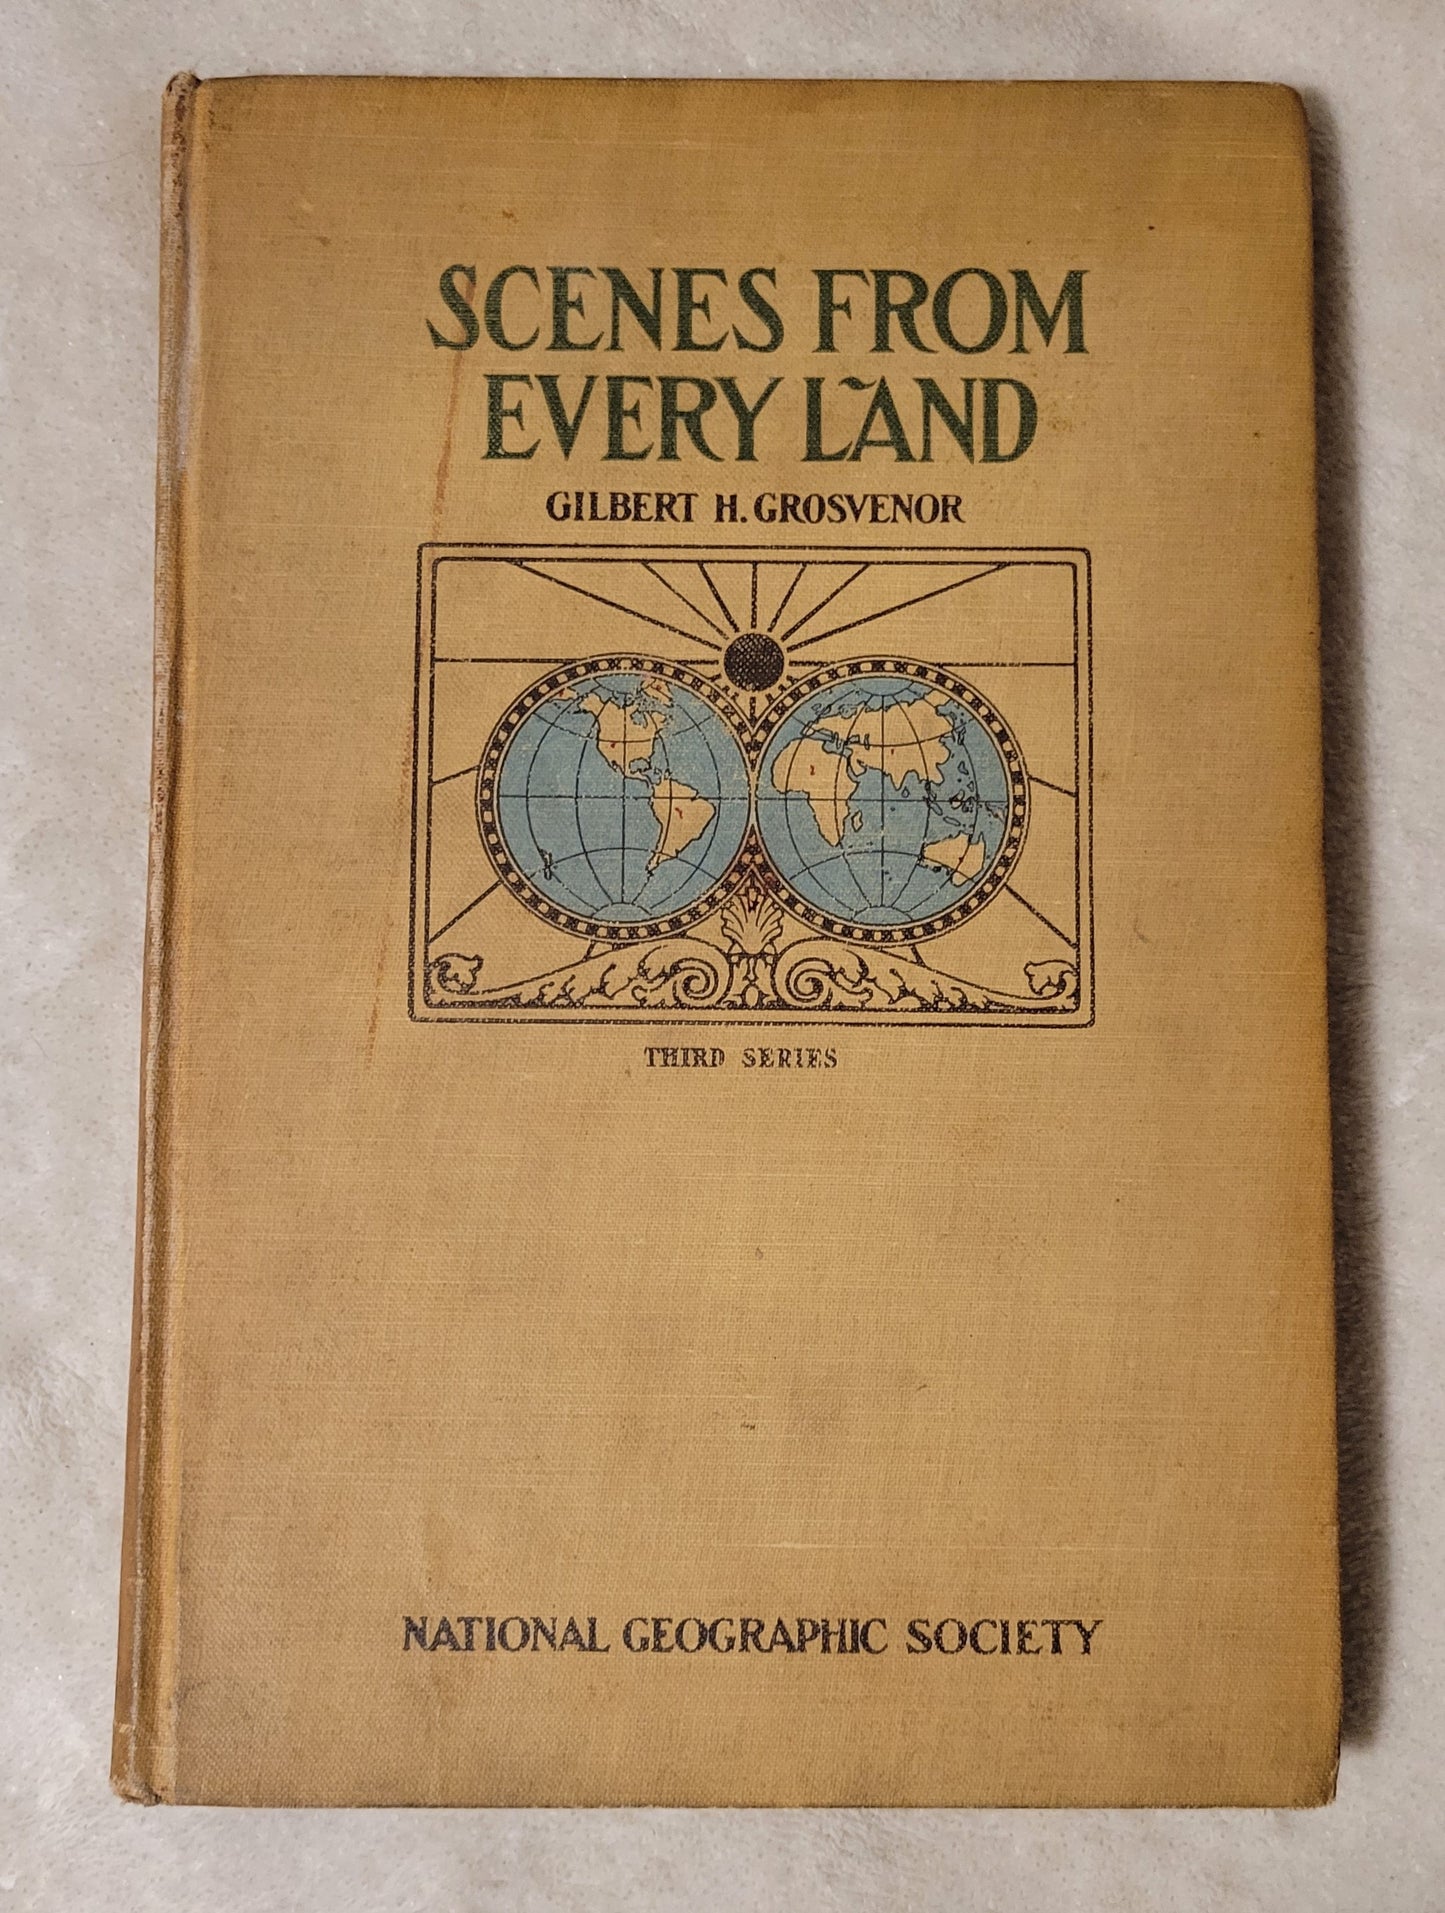 Antique book for sale National Geographic’s "Scenes from Every Land" by Gilbert H. Grosvenor. View of front cover.